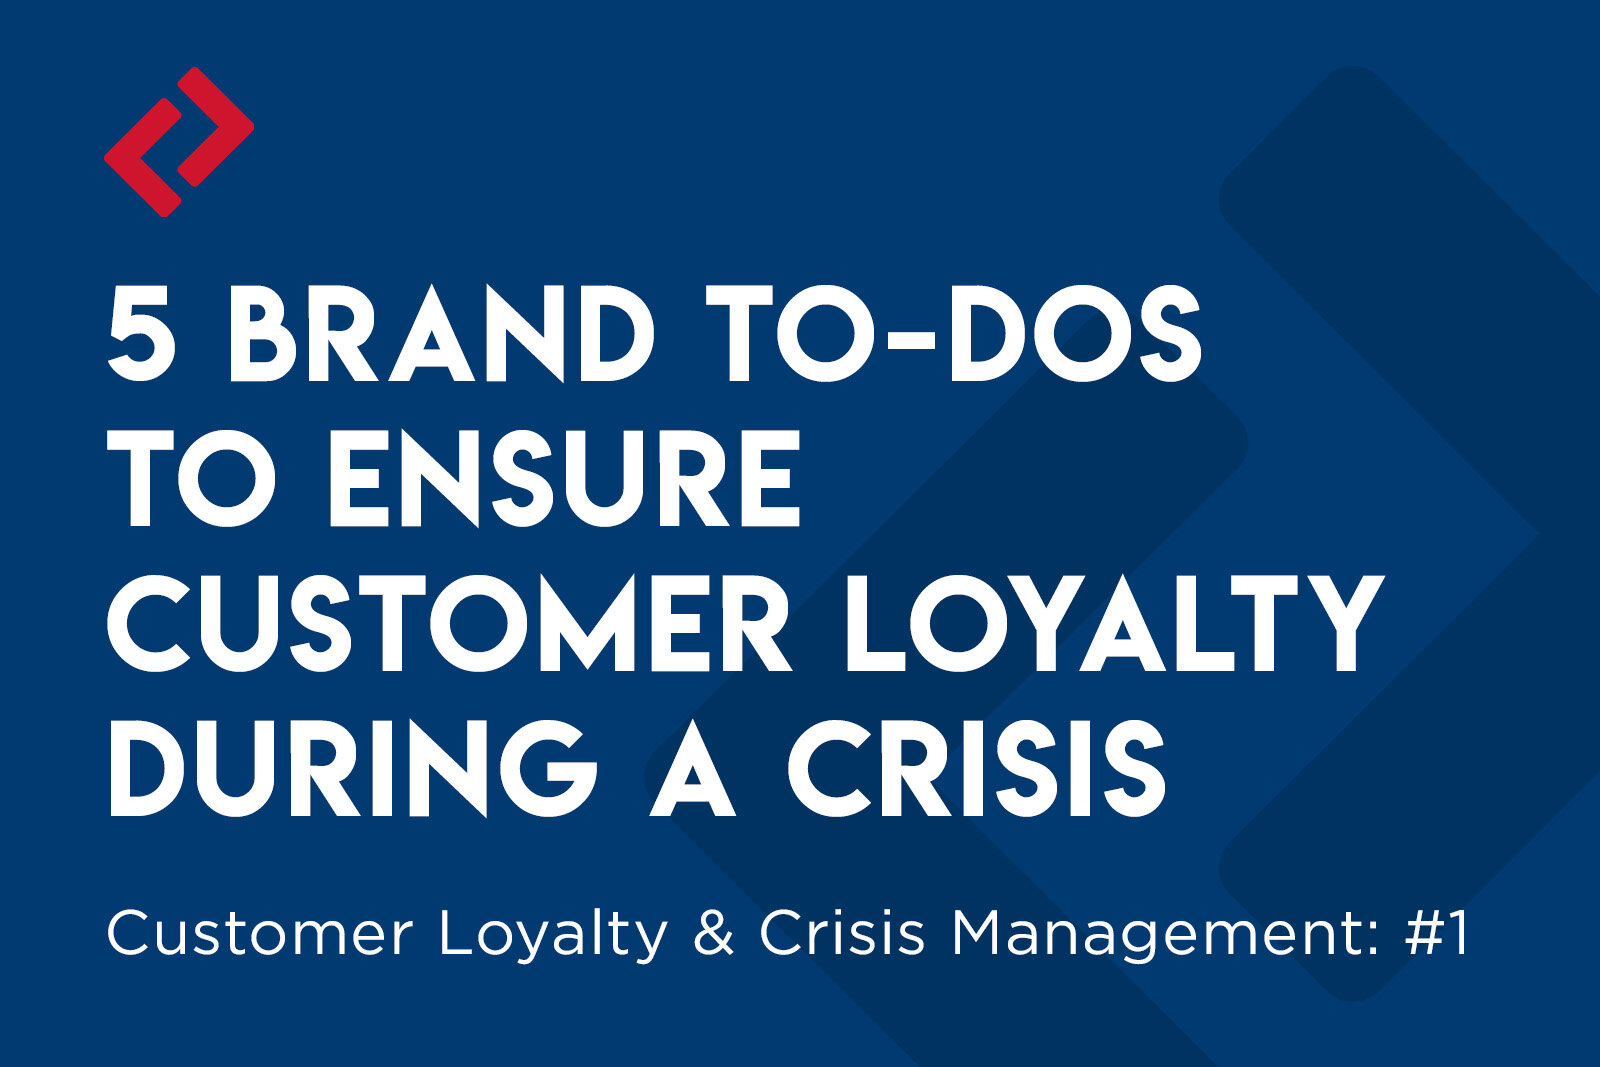 Five Brand To-dos to Ensure Customer Loyalty During a Crisis Article Featured Image